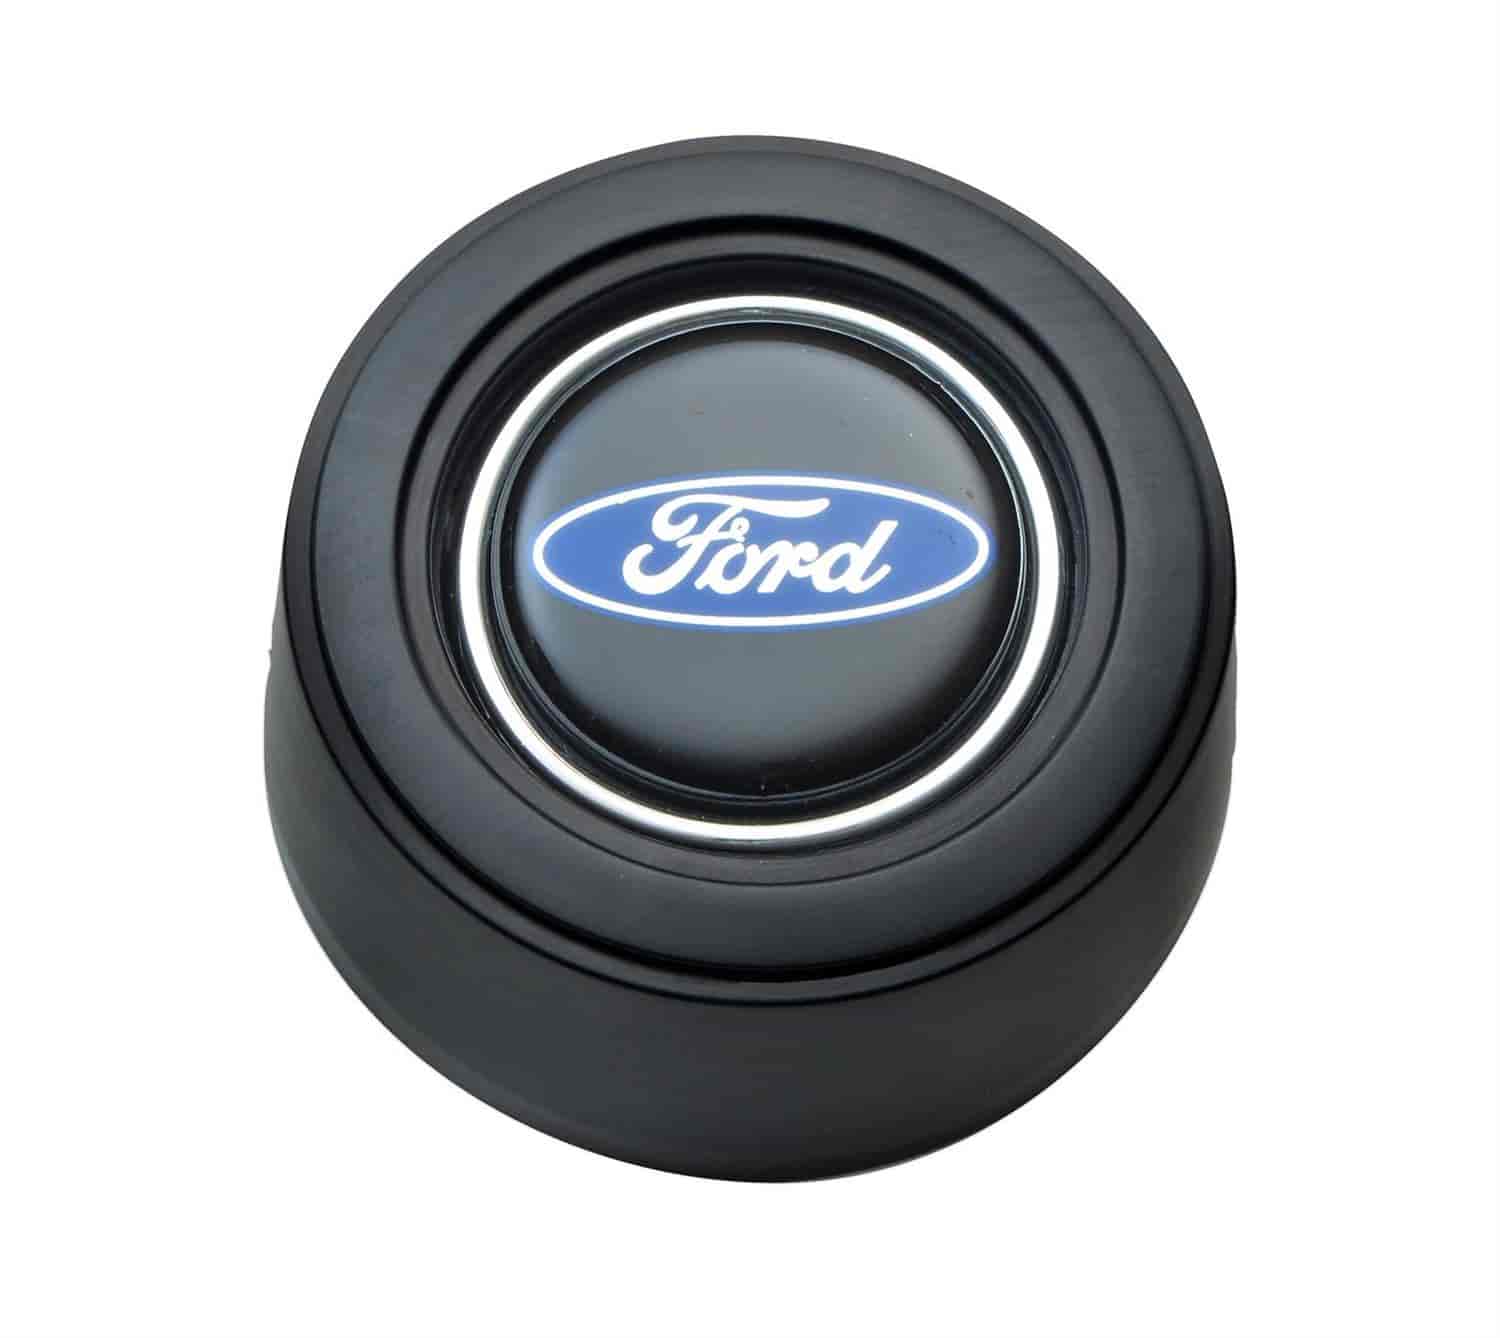 GT3 Hi-Rise Ford Oval Color Horn Button Black Anodized